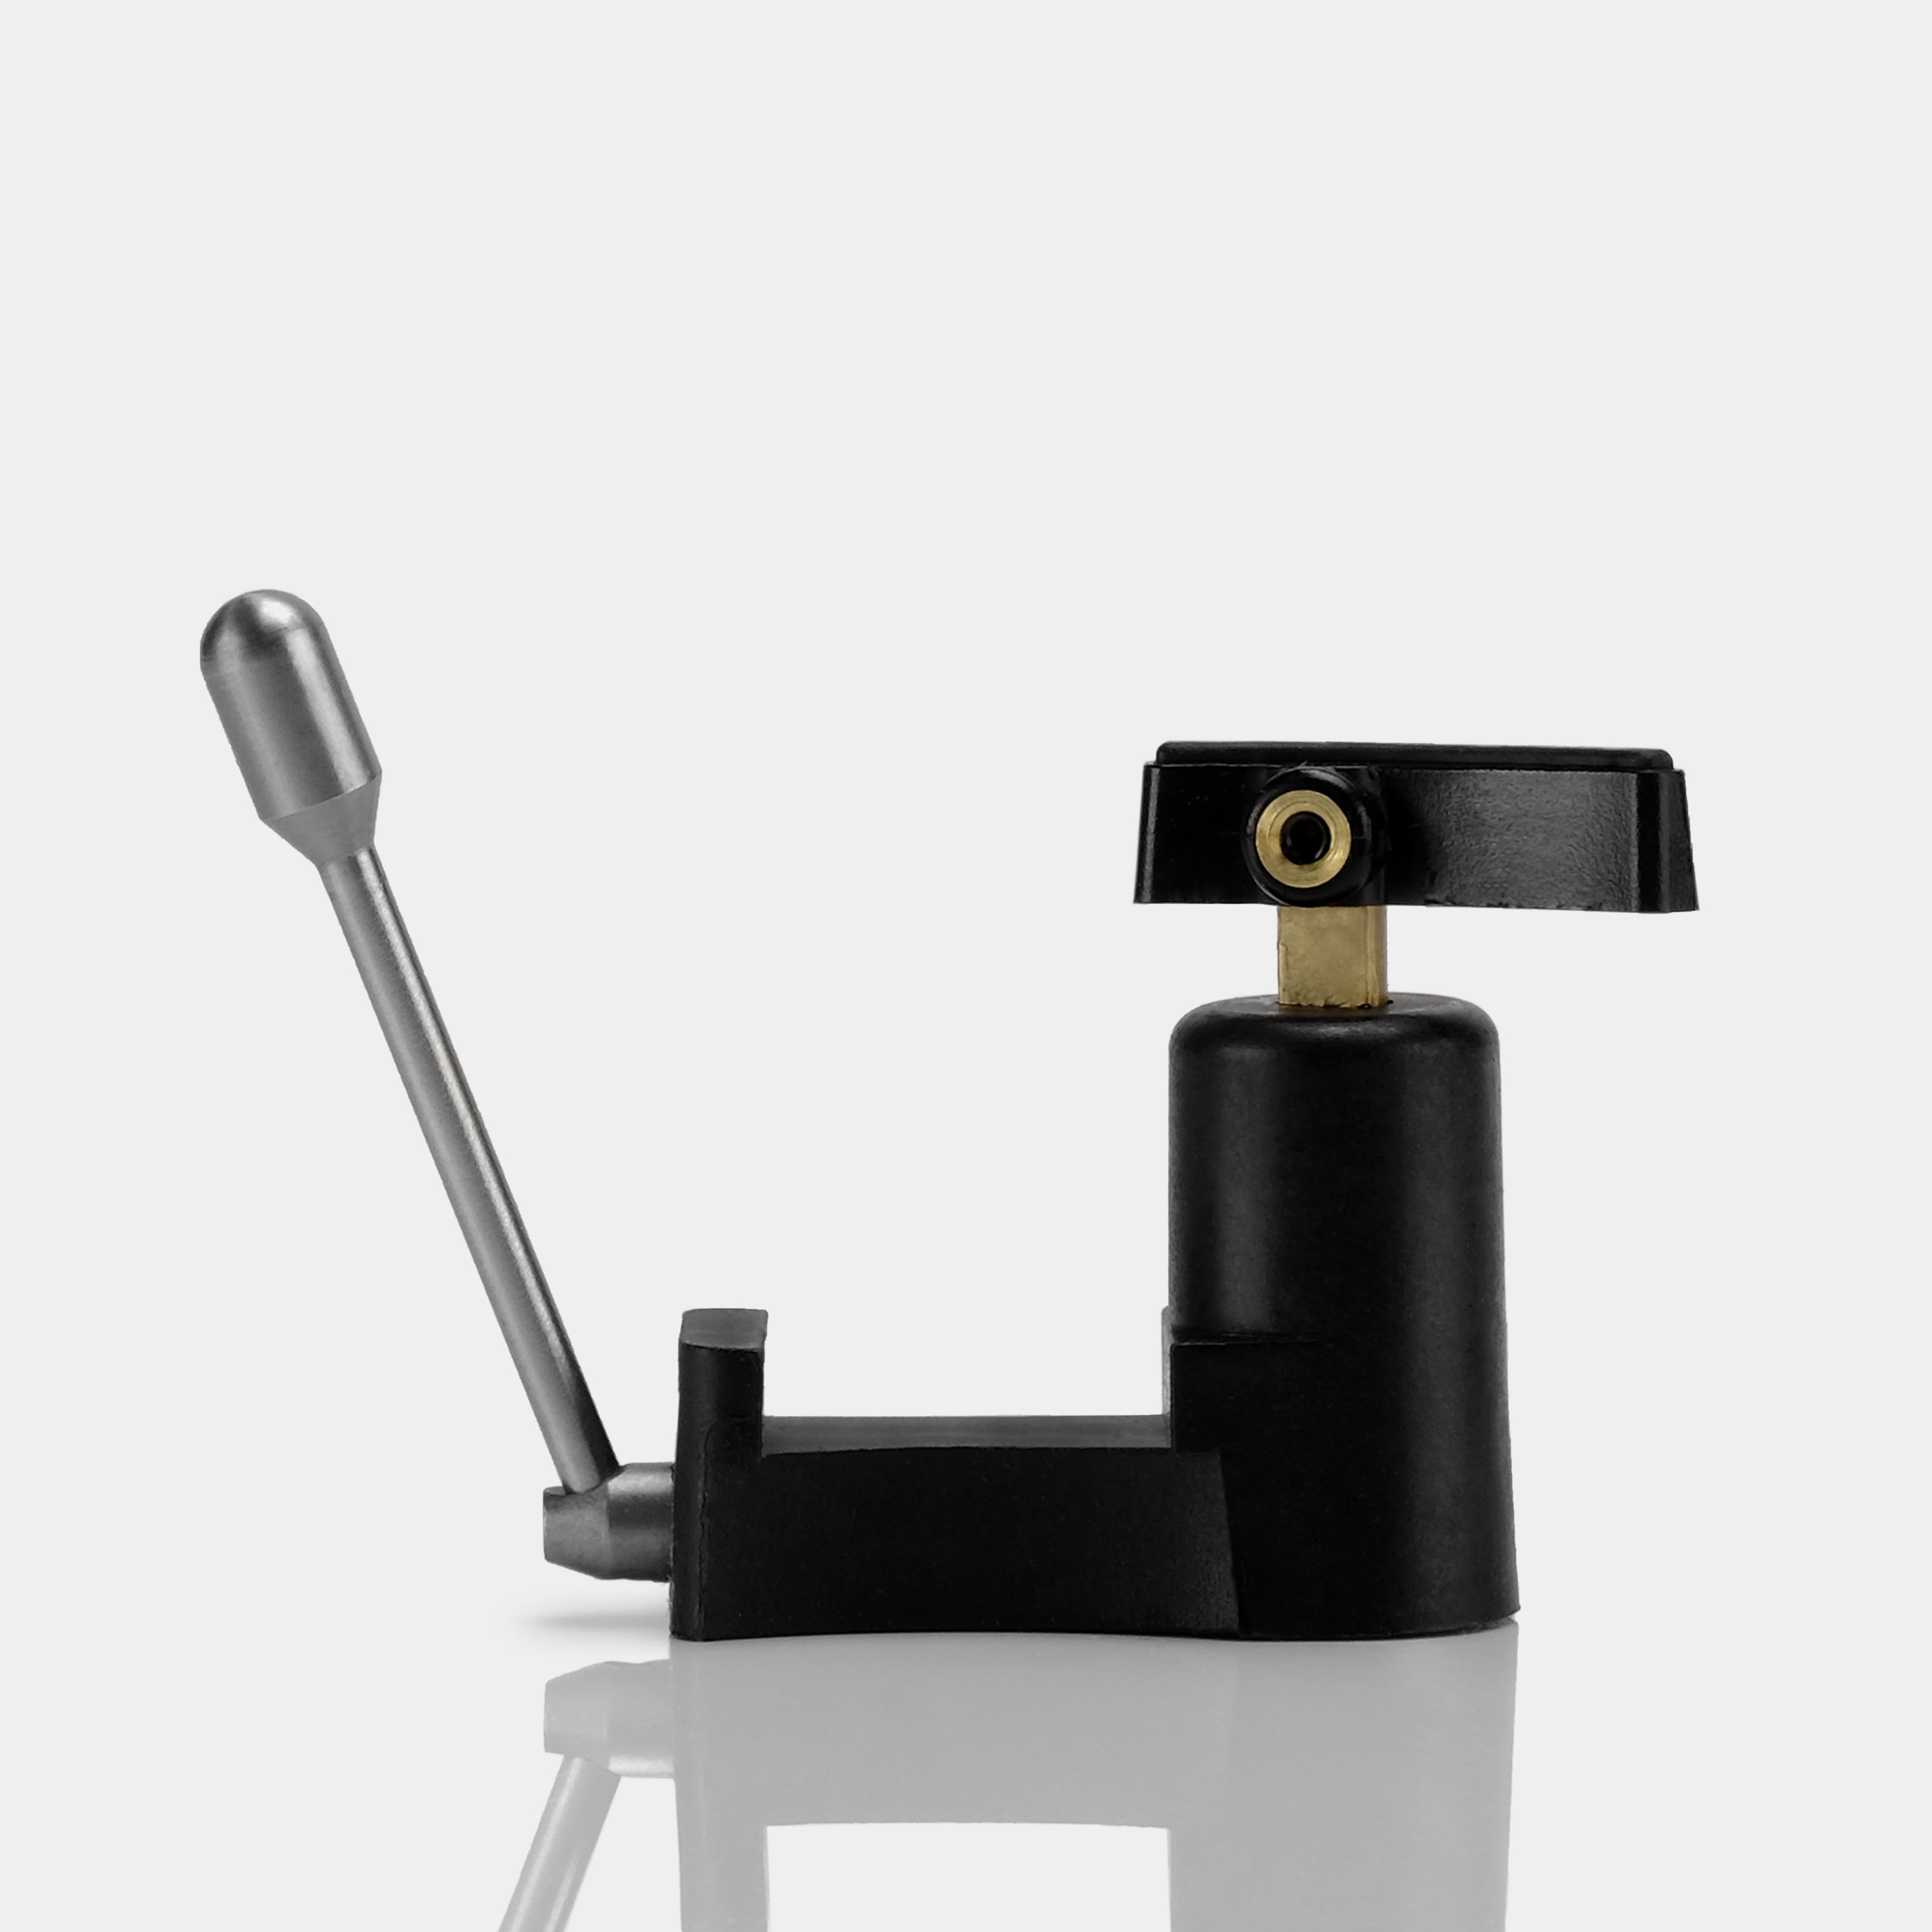 Cue Lever for Orbit Turntables by U-Turn Audio